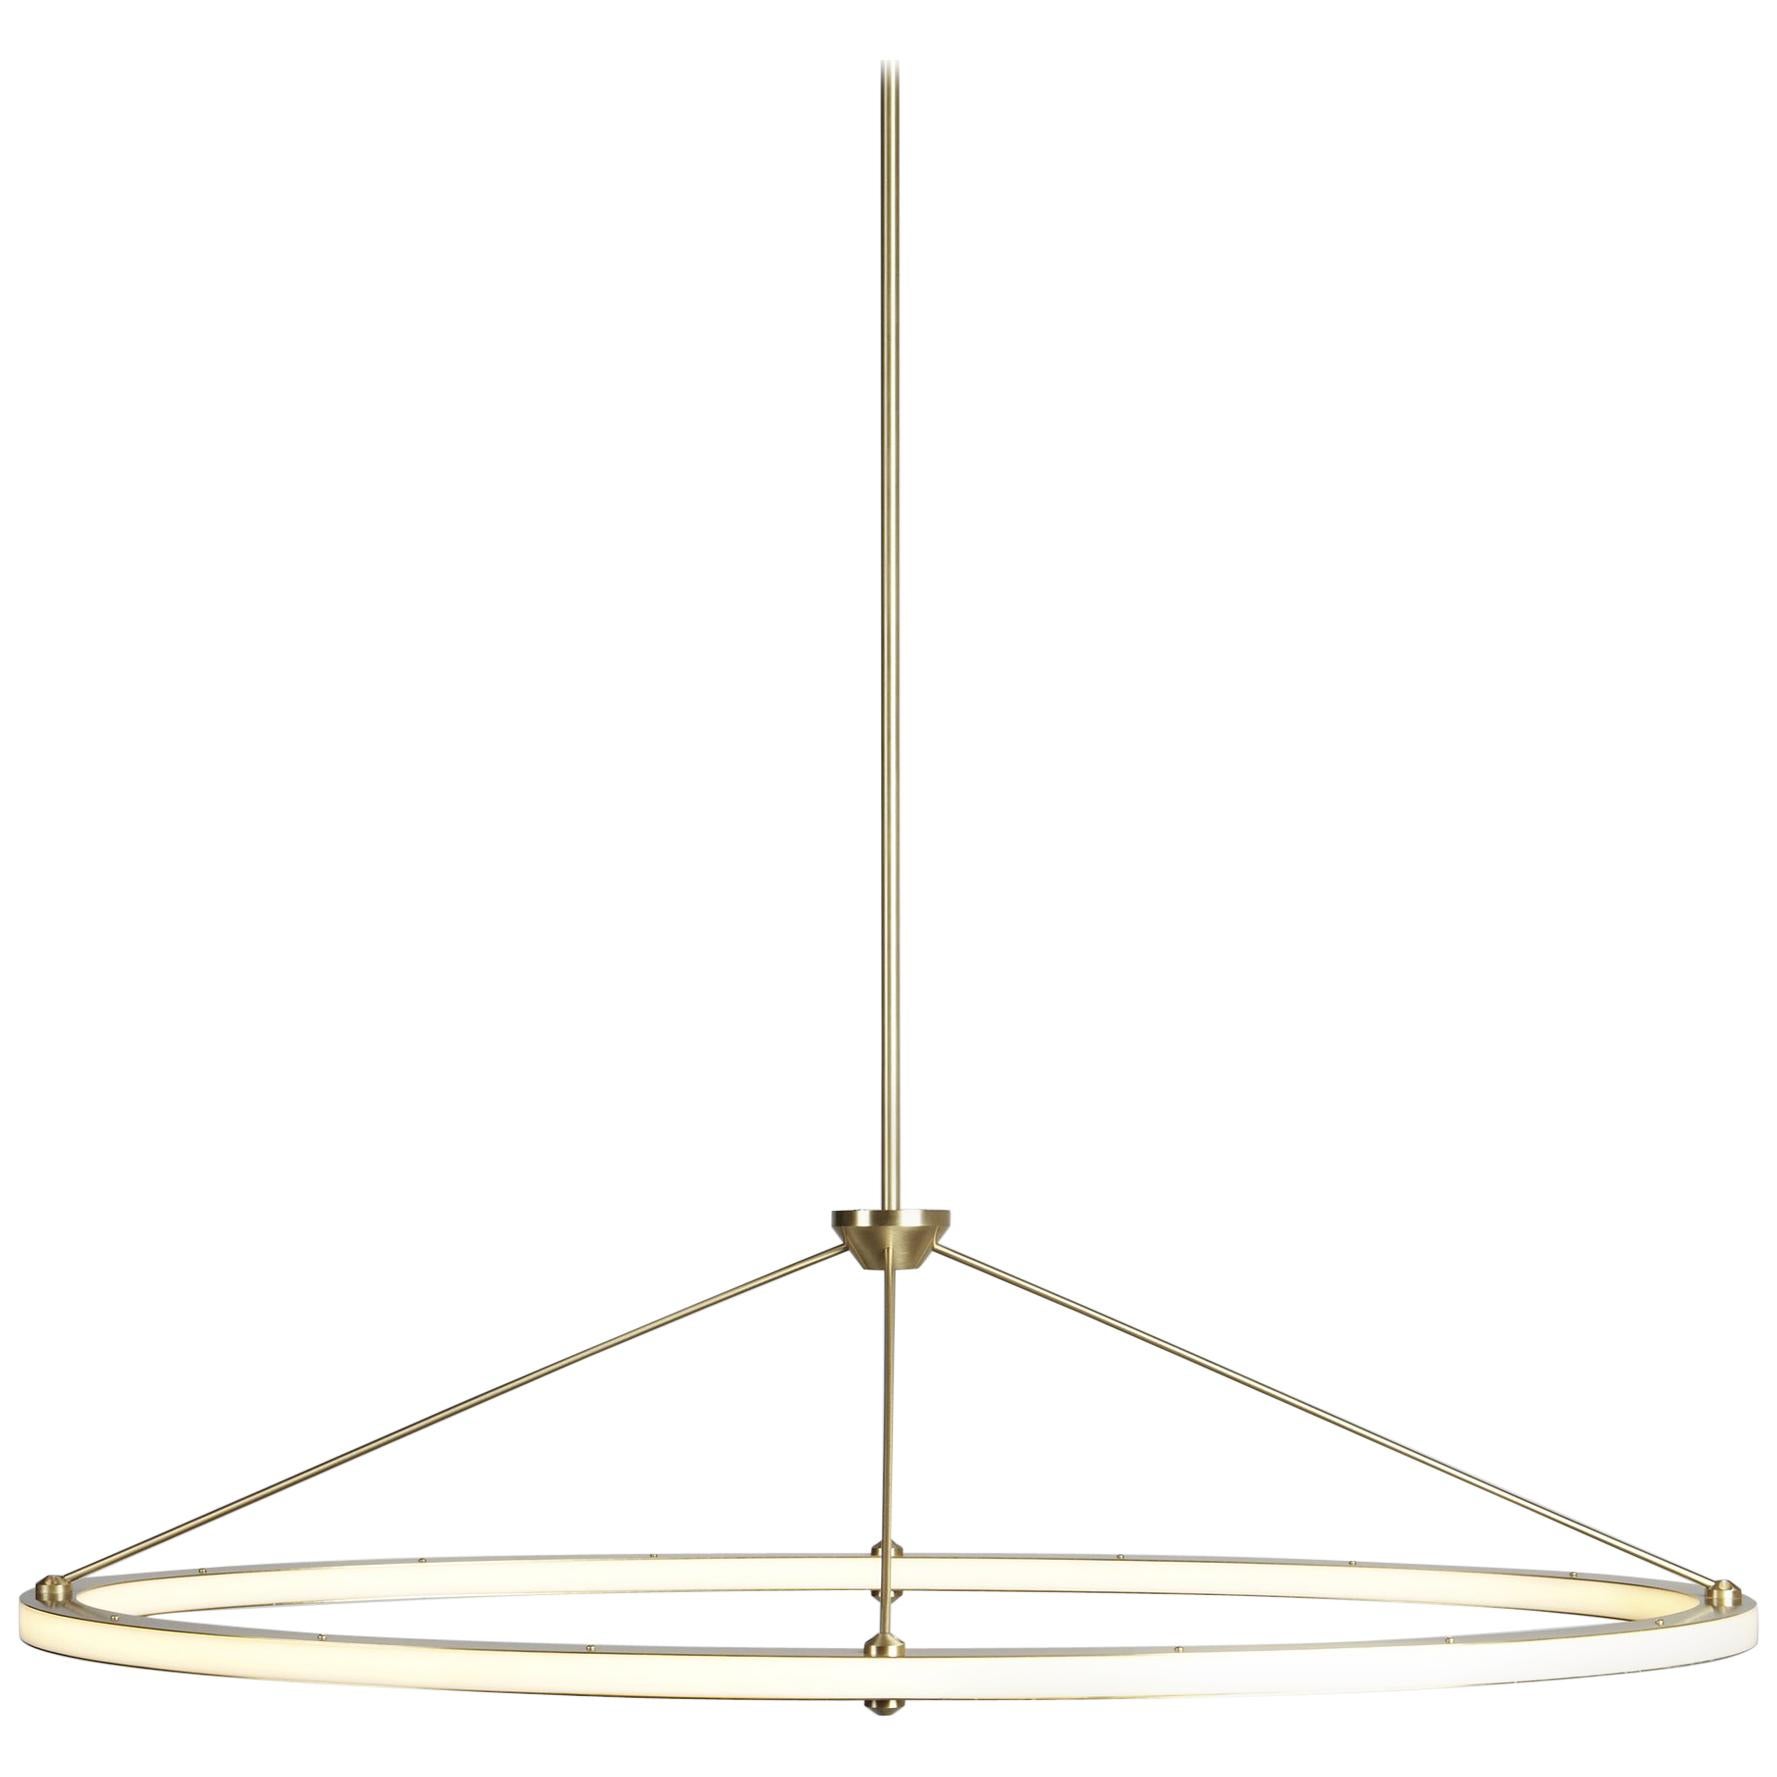 Halo Oval Pendant by Paul Loebach for Roll & Hill